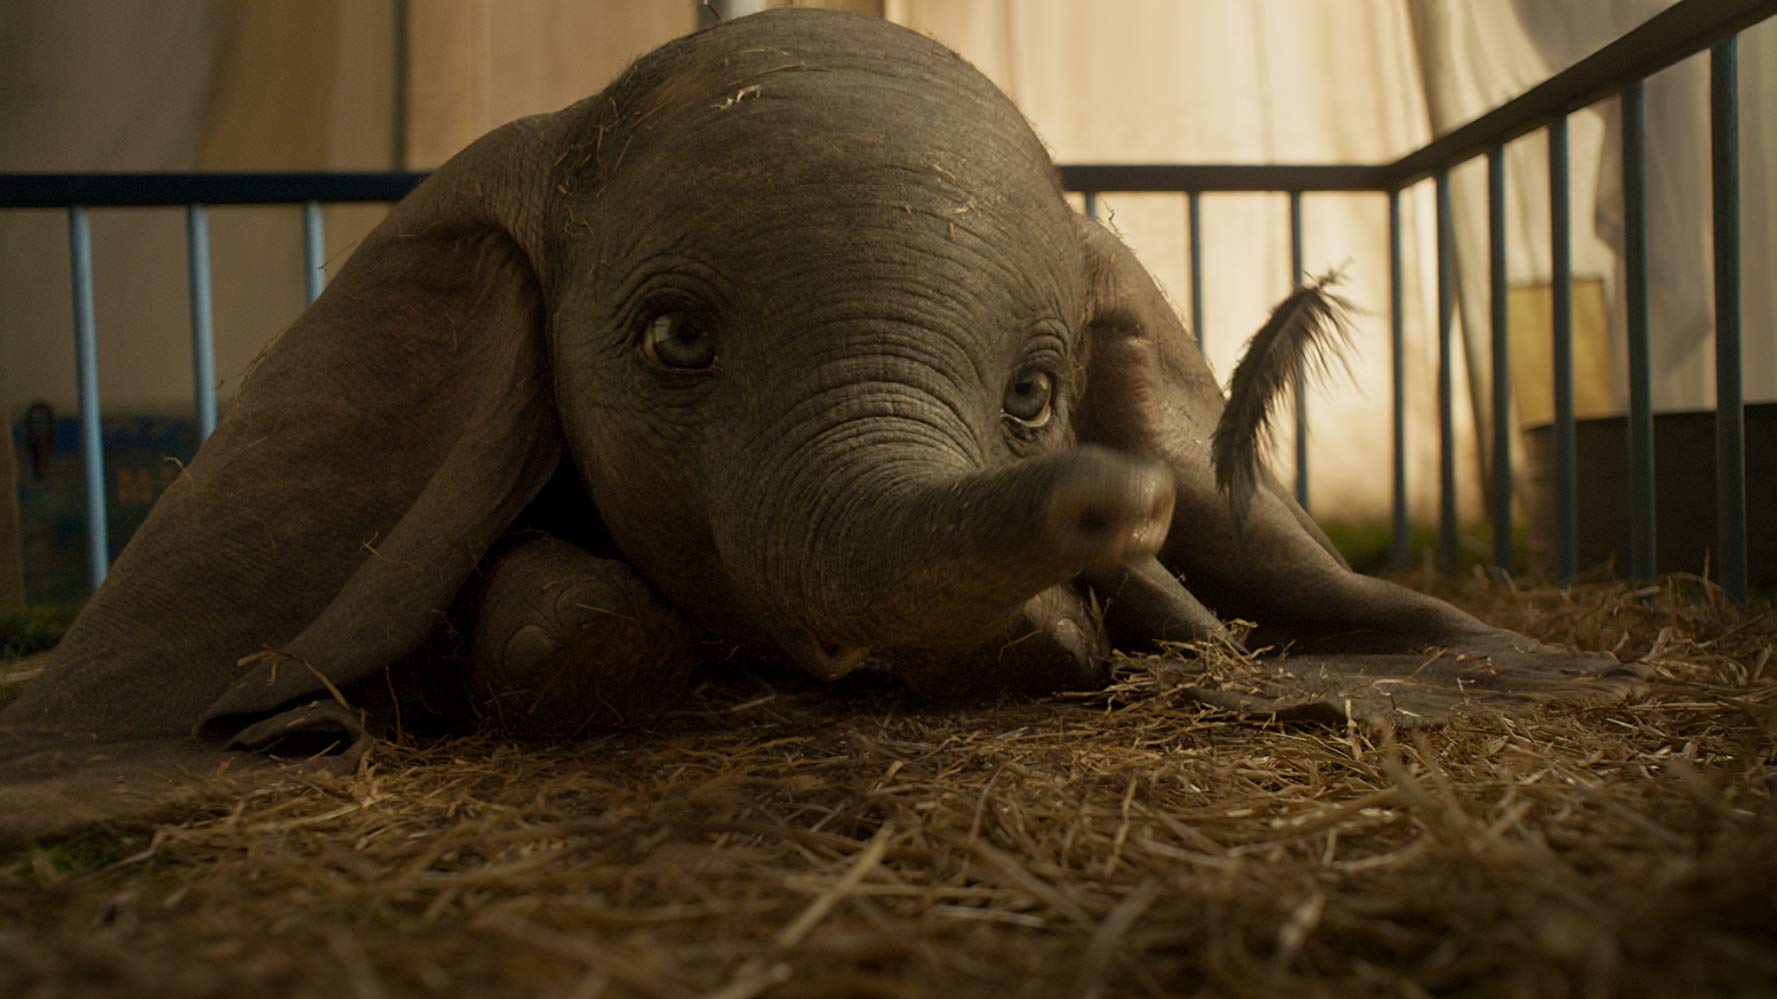 Dumbo is the cutest animated elephant out there.